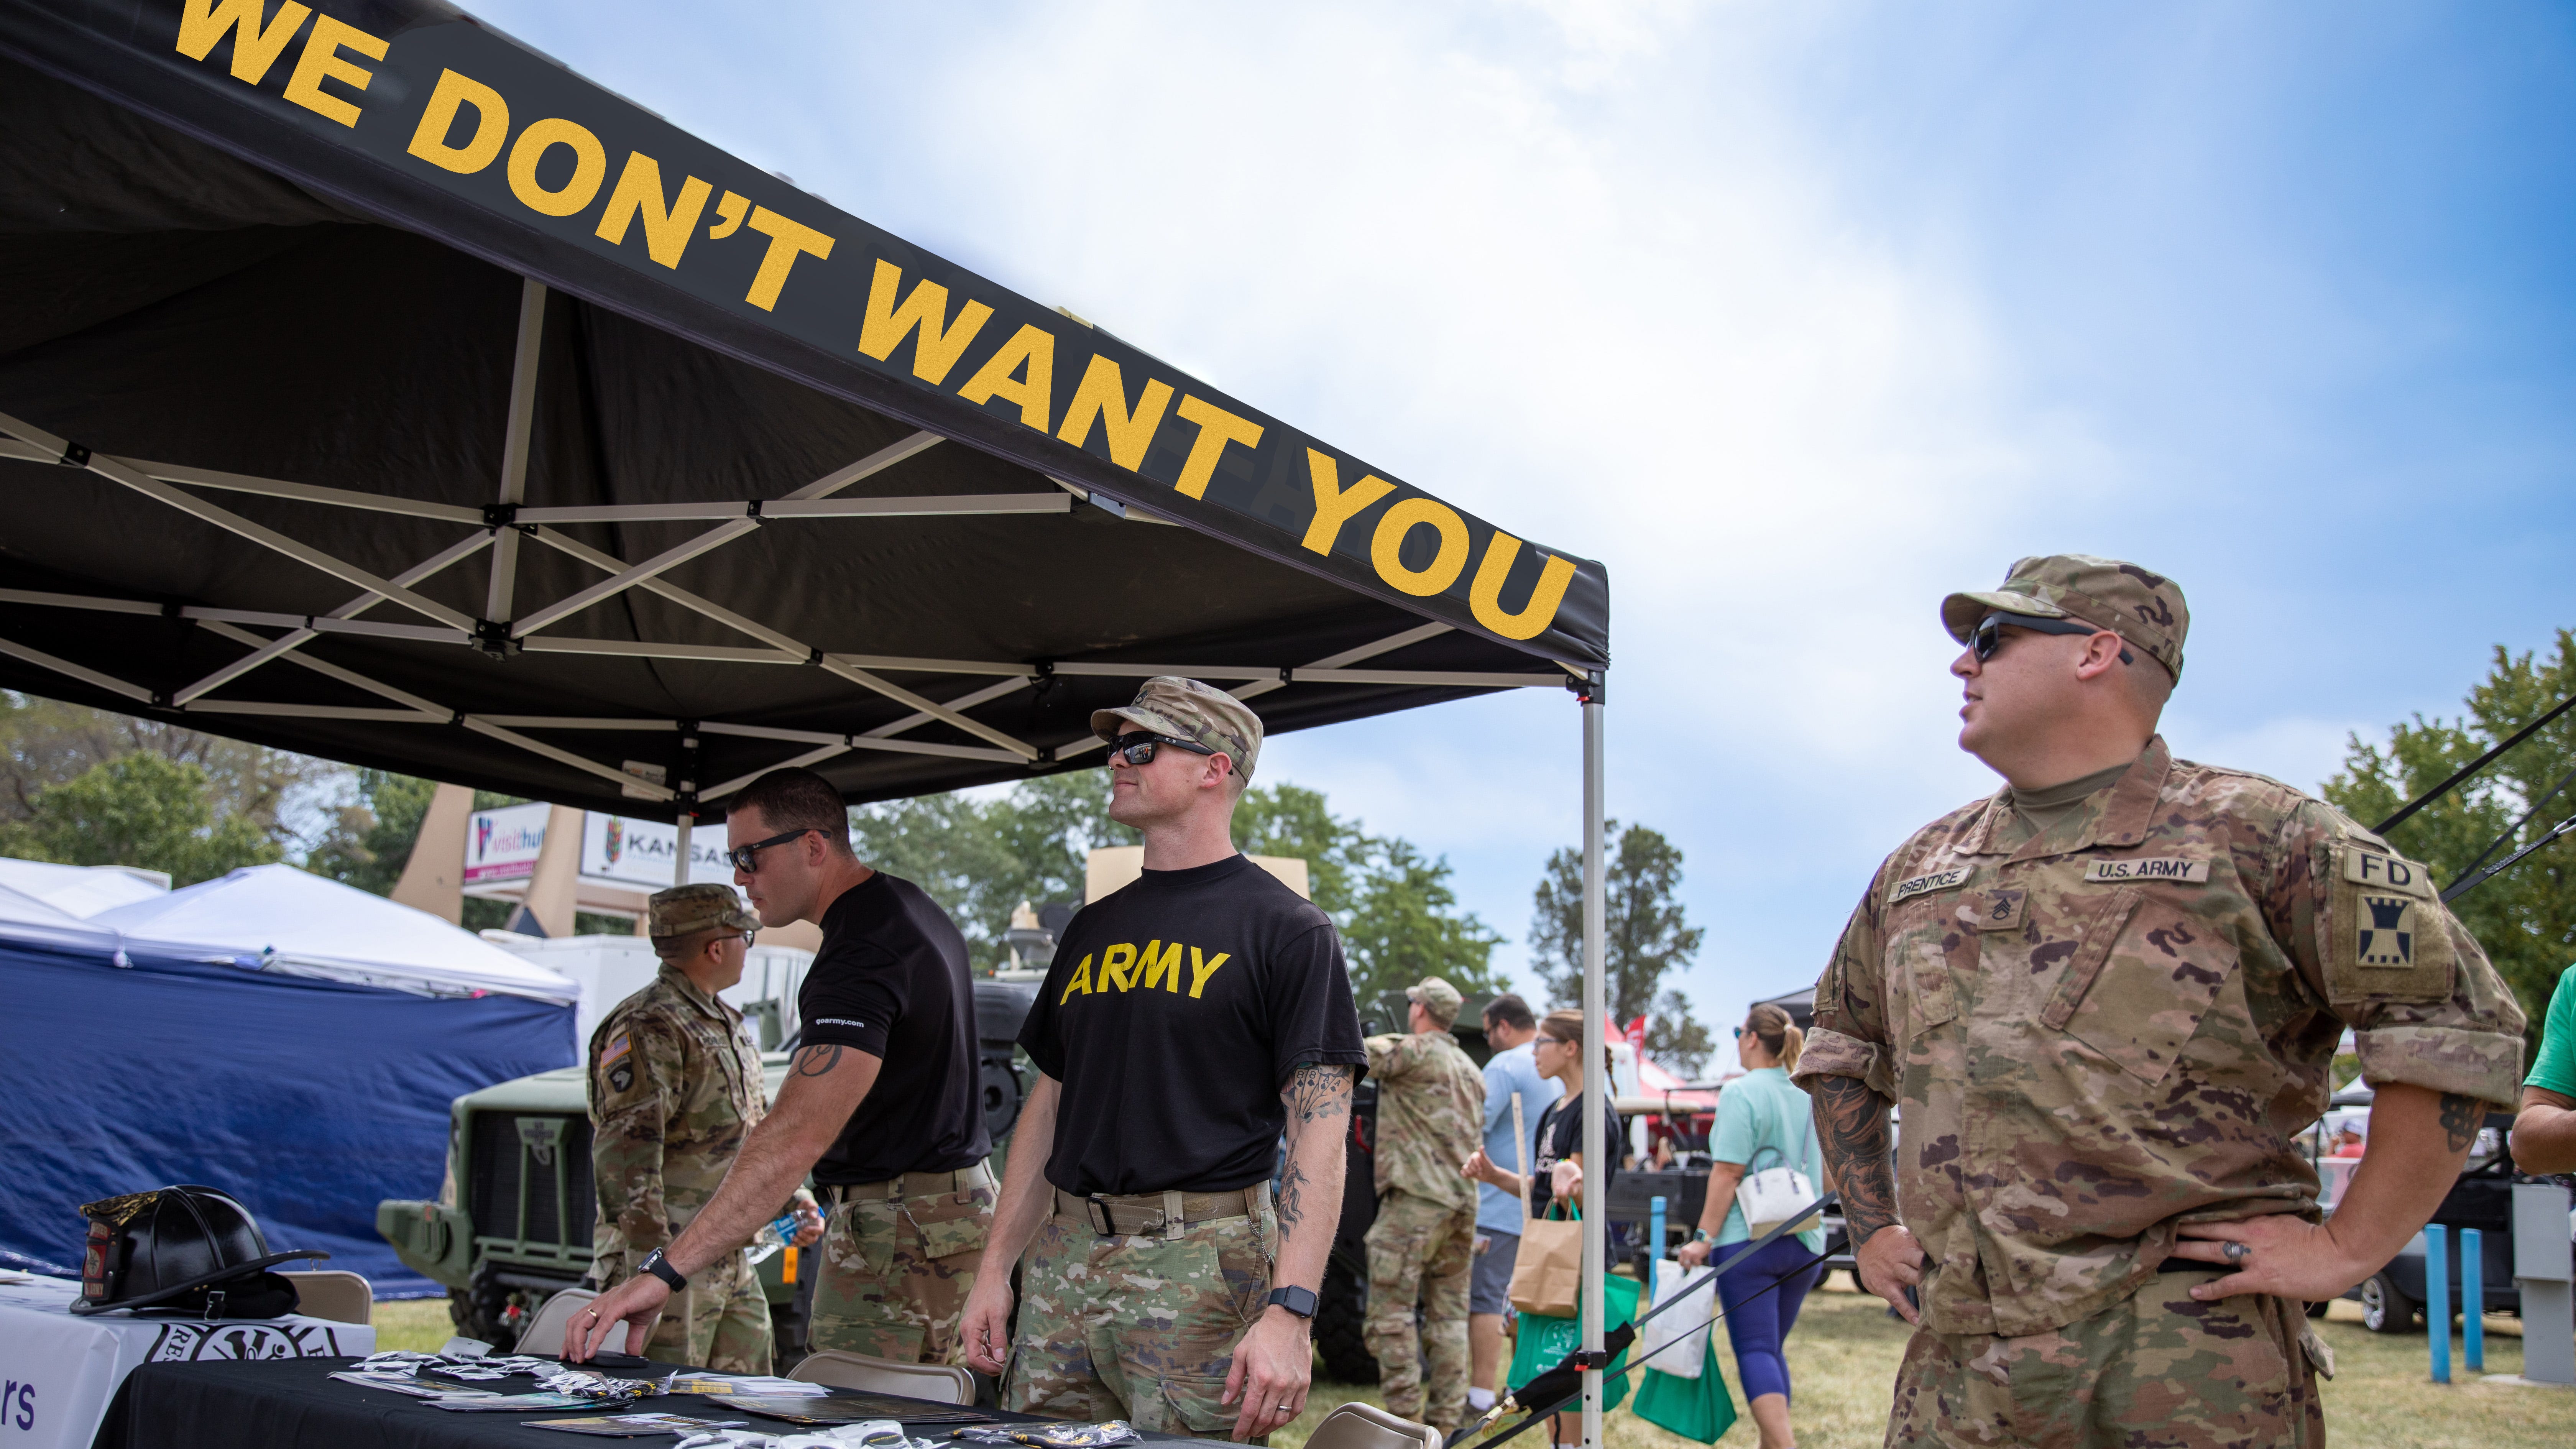 'We don't want you anyway!' Army launches reverse psychology recruiting campaign